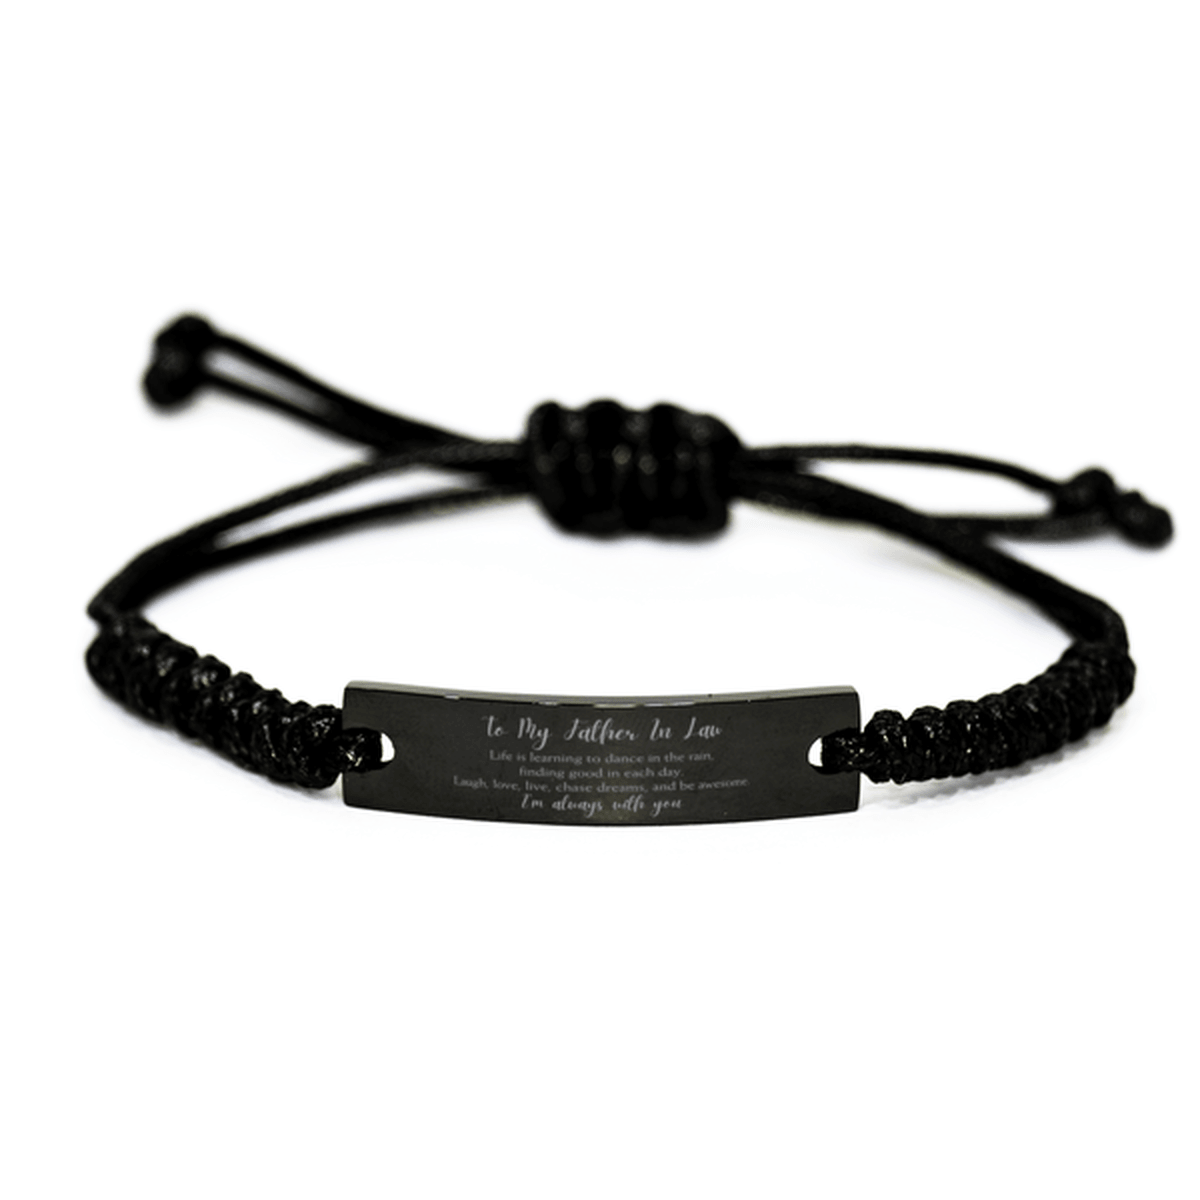 Father In Law Christmas Perfect Gifts, Father In Law Black Rope Bracelet, Motivational Father In Law Engraved Gifts, Birthday Gifts For Father In Law, To My Father In Law Life is learning to dance in the rain, finding good in each day. I'm always with you